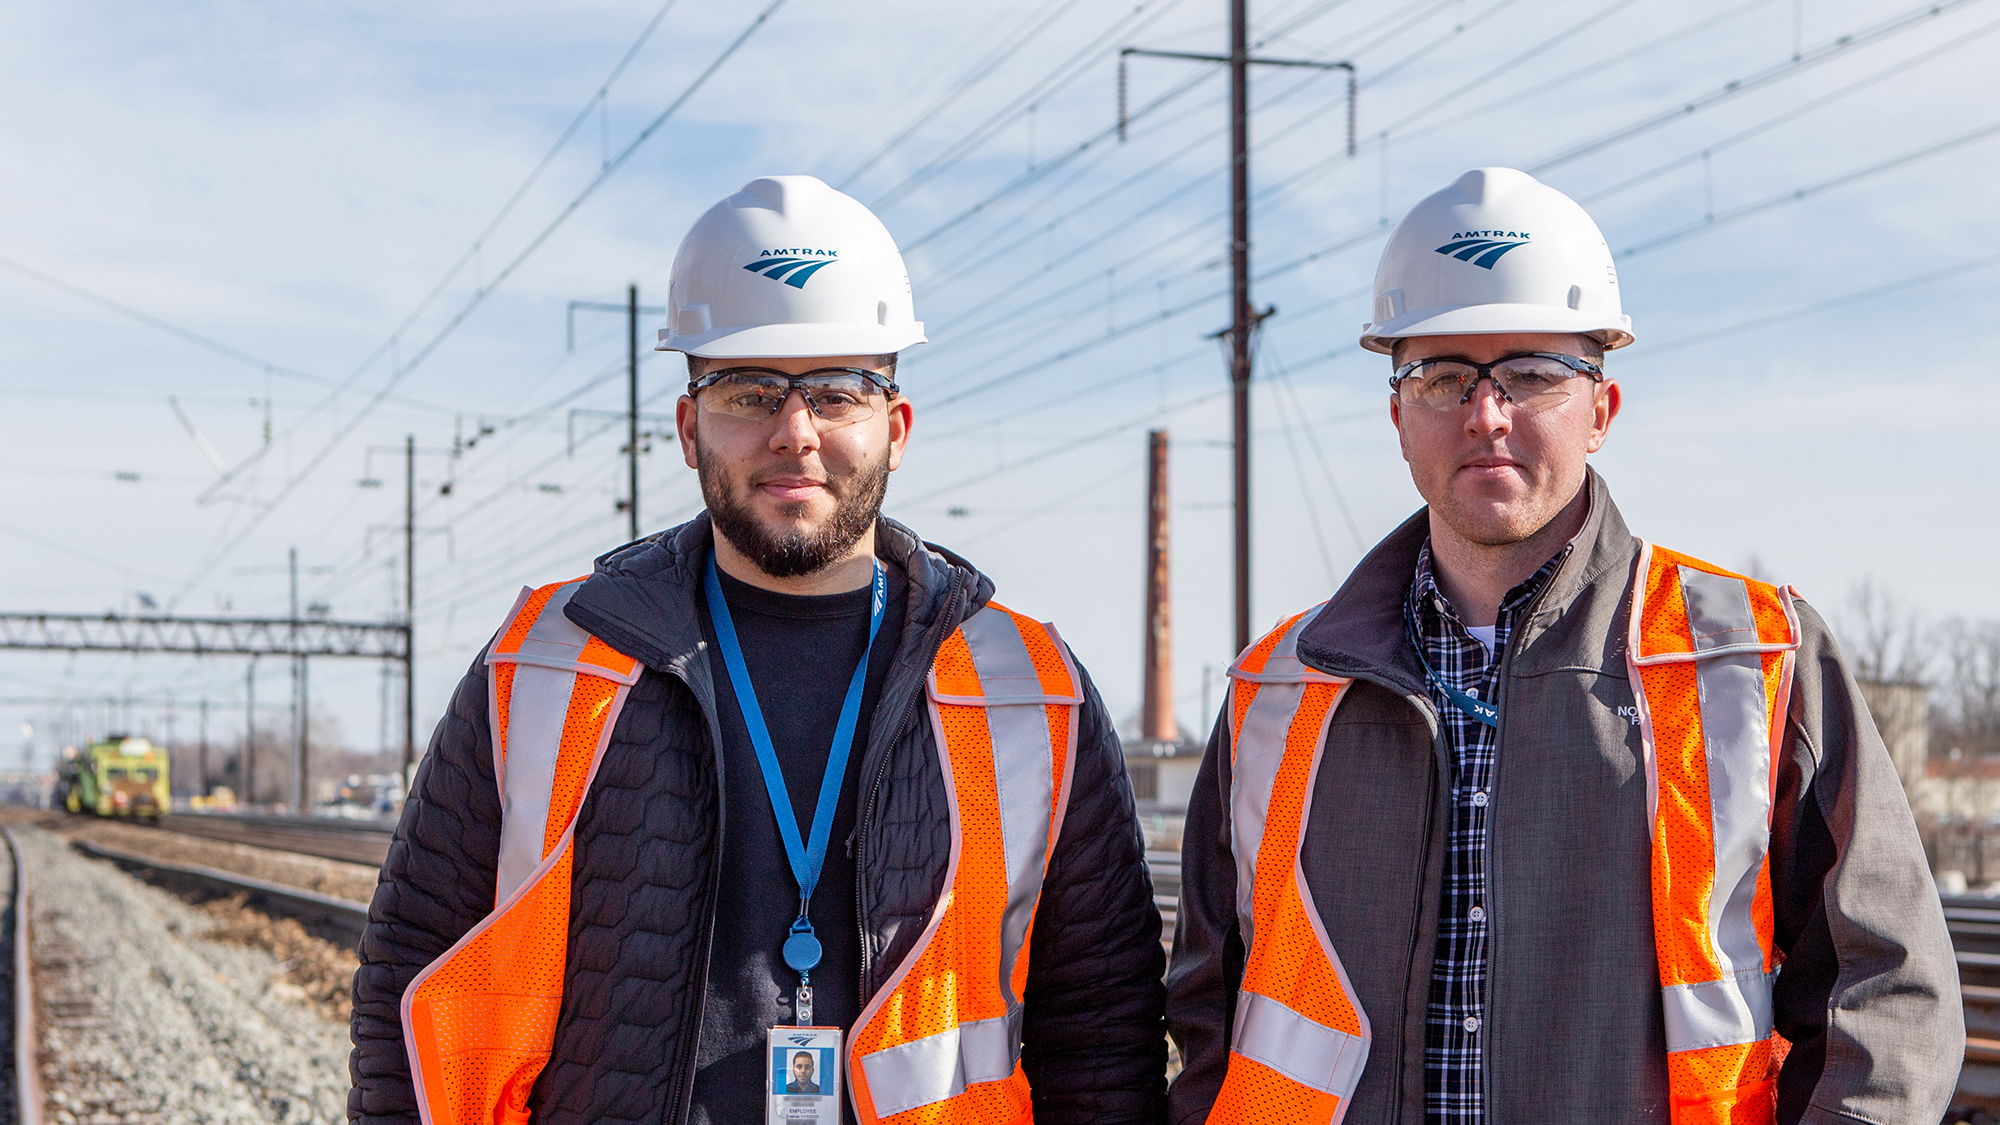 Two Amtrak employees in hard hats stand in the rail yard.